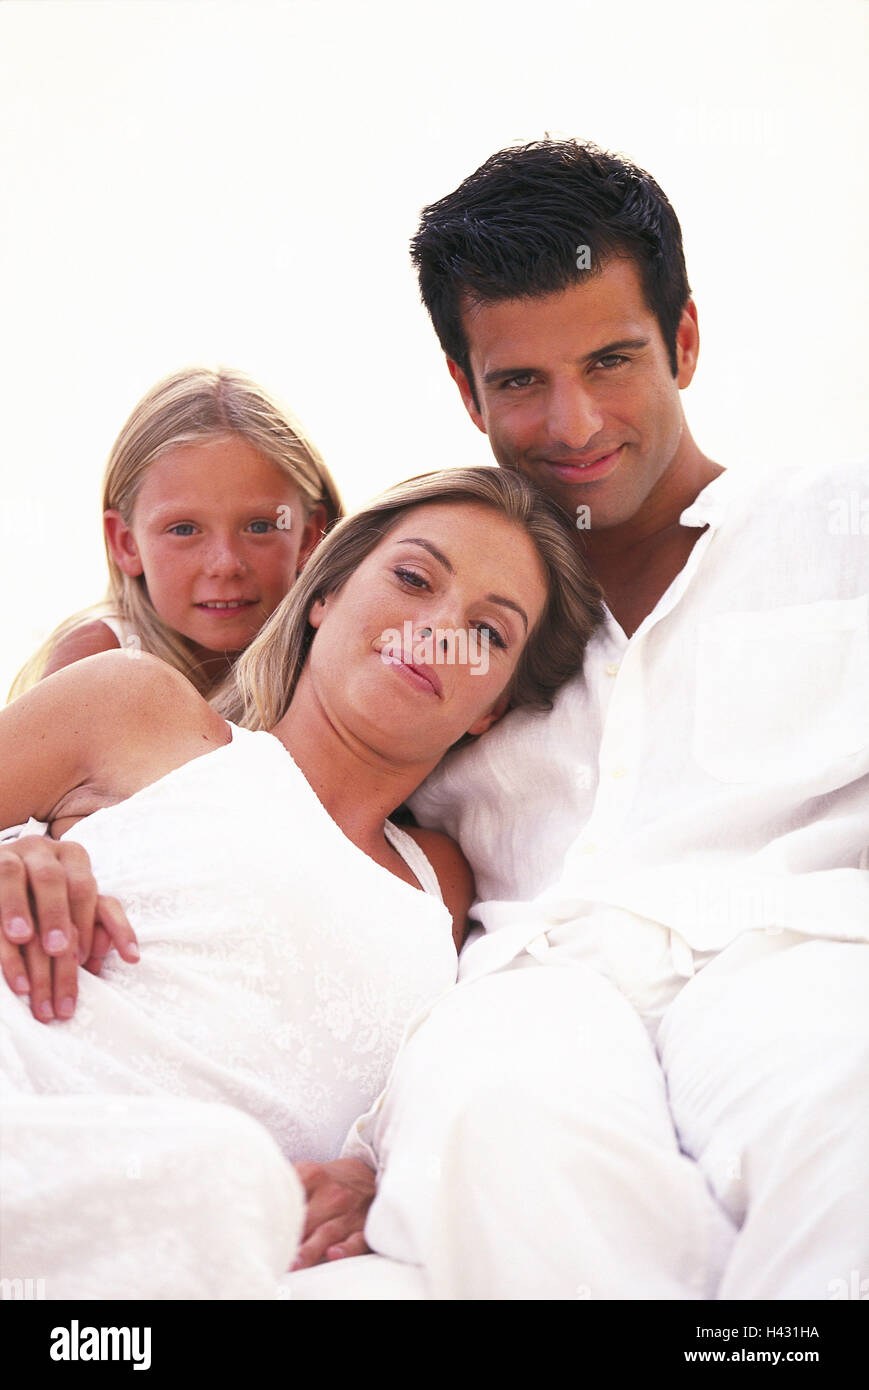 Parents, daughter, happily, relaxen   Family, family portrait, family picture, family luck, 20-30 years, 8 years, clothing, harmony, knows serenity, contentment recuperation relaxation, cuddles, nestles, leisure time, gaze camera, Stock Photo